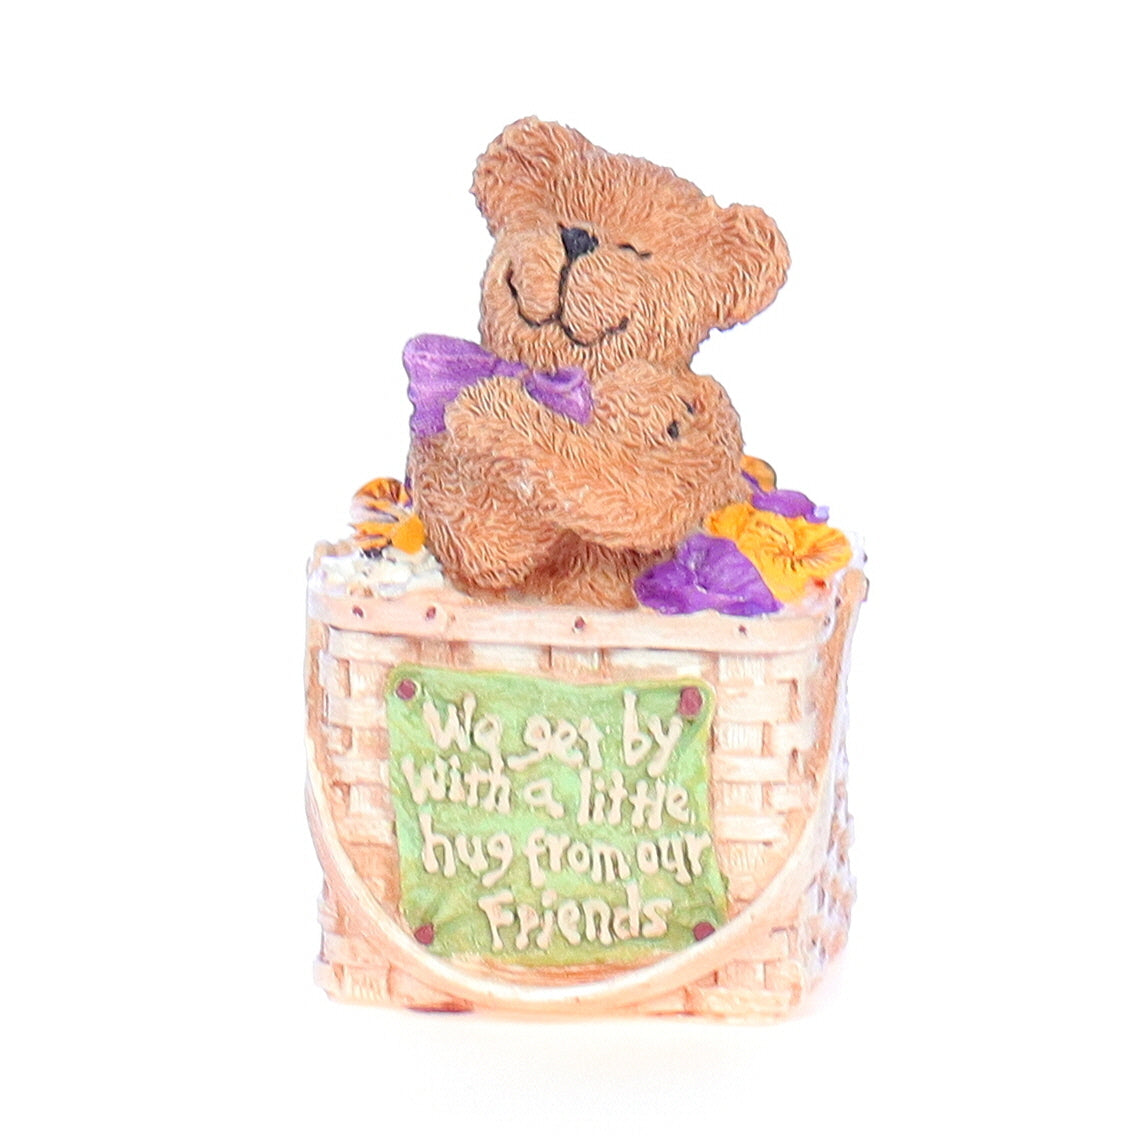 the bearstone collection 10006 huggsie spring figurine 2004 front